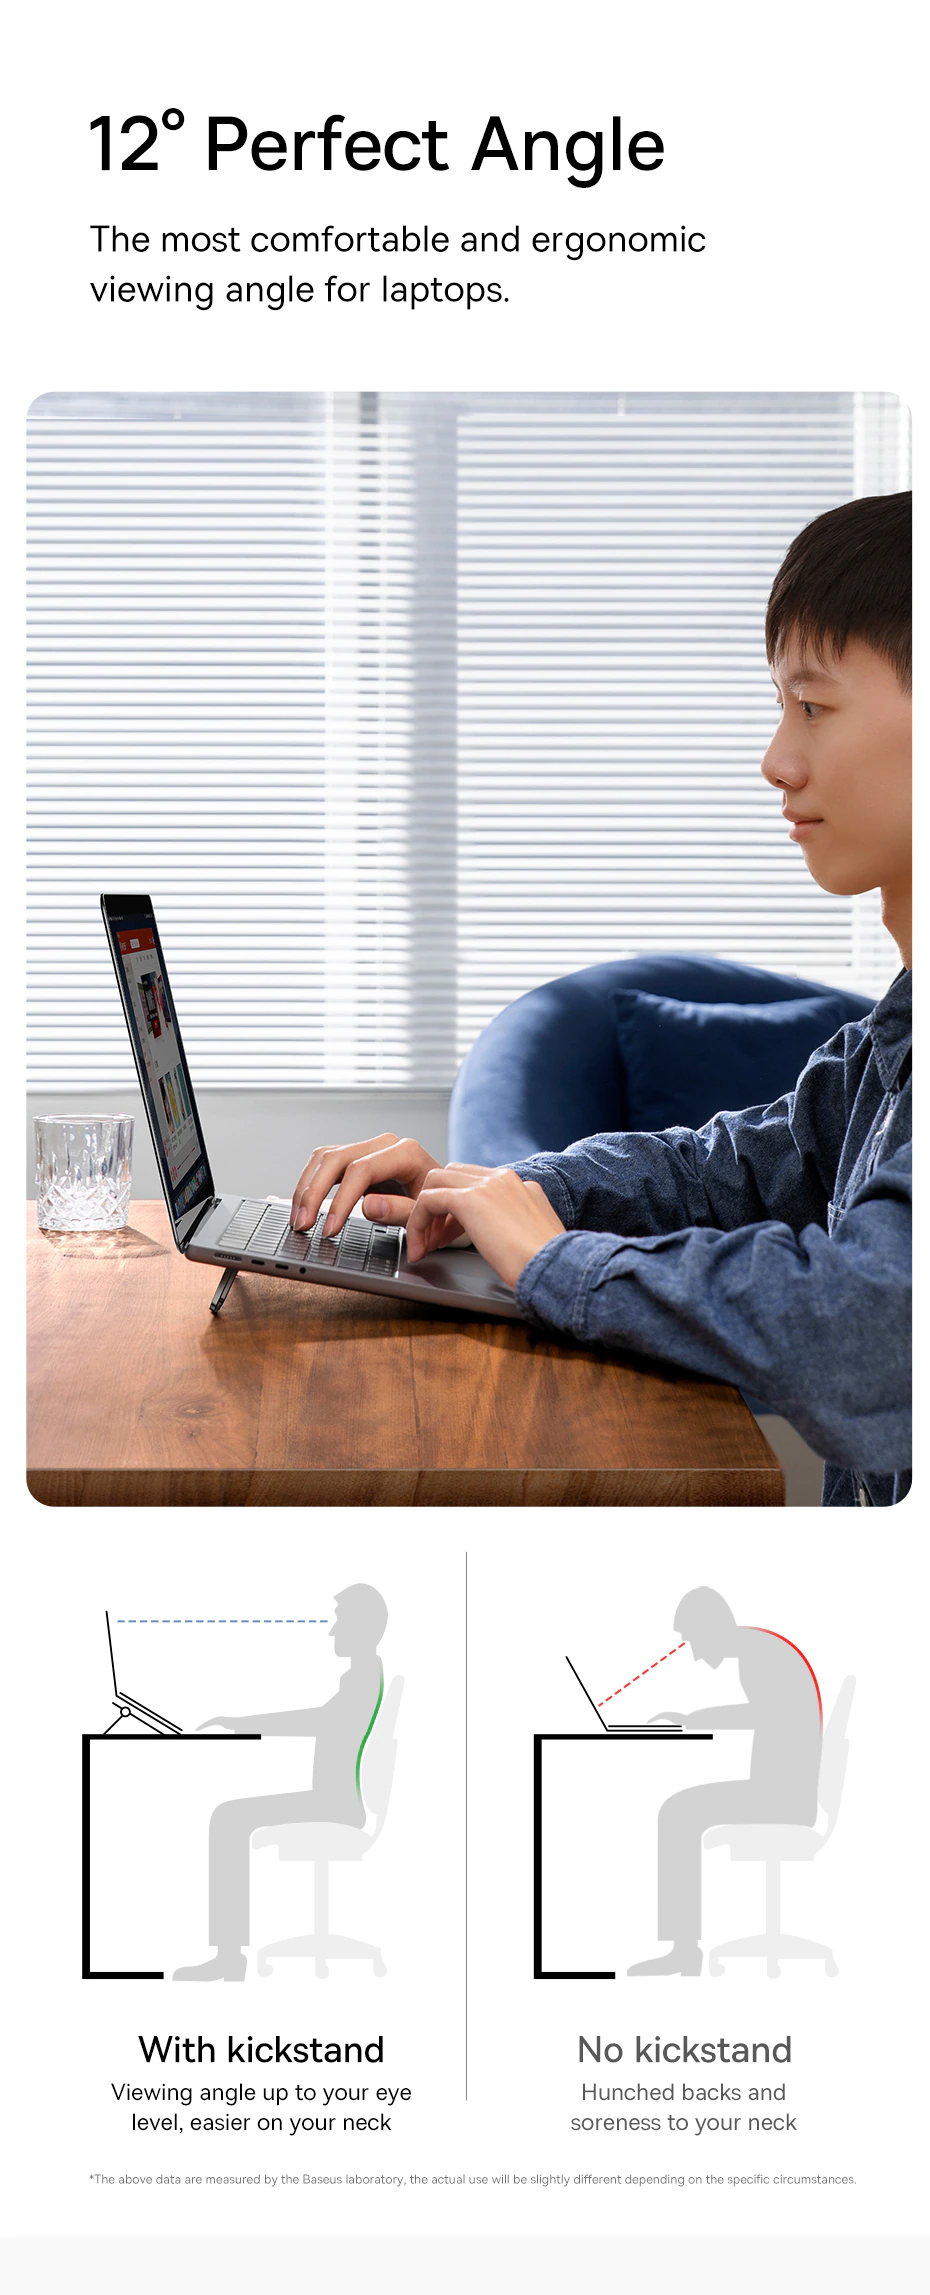 12 degree Perfect Angle The most comfortable and ergonomic viewing angle for laptops.